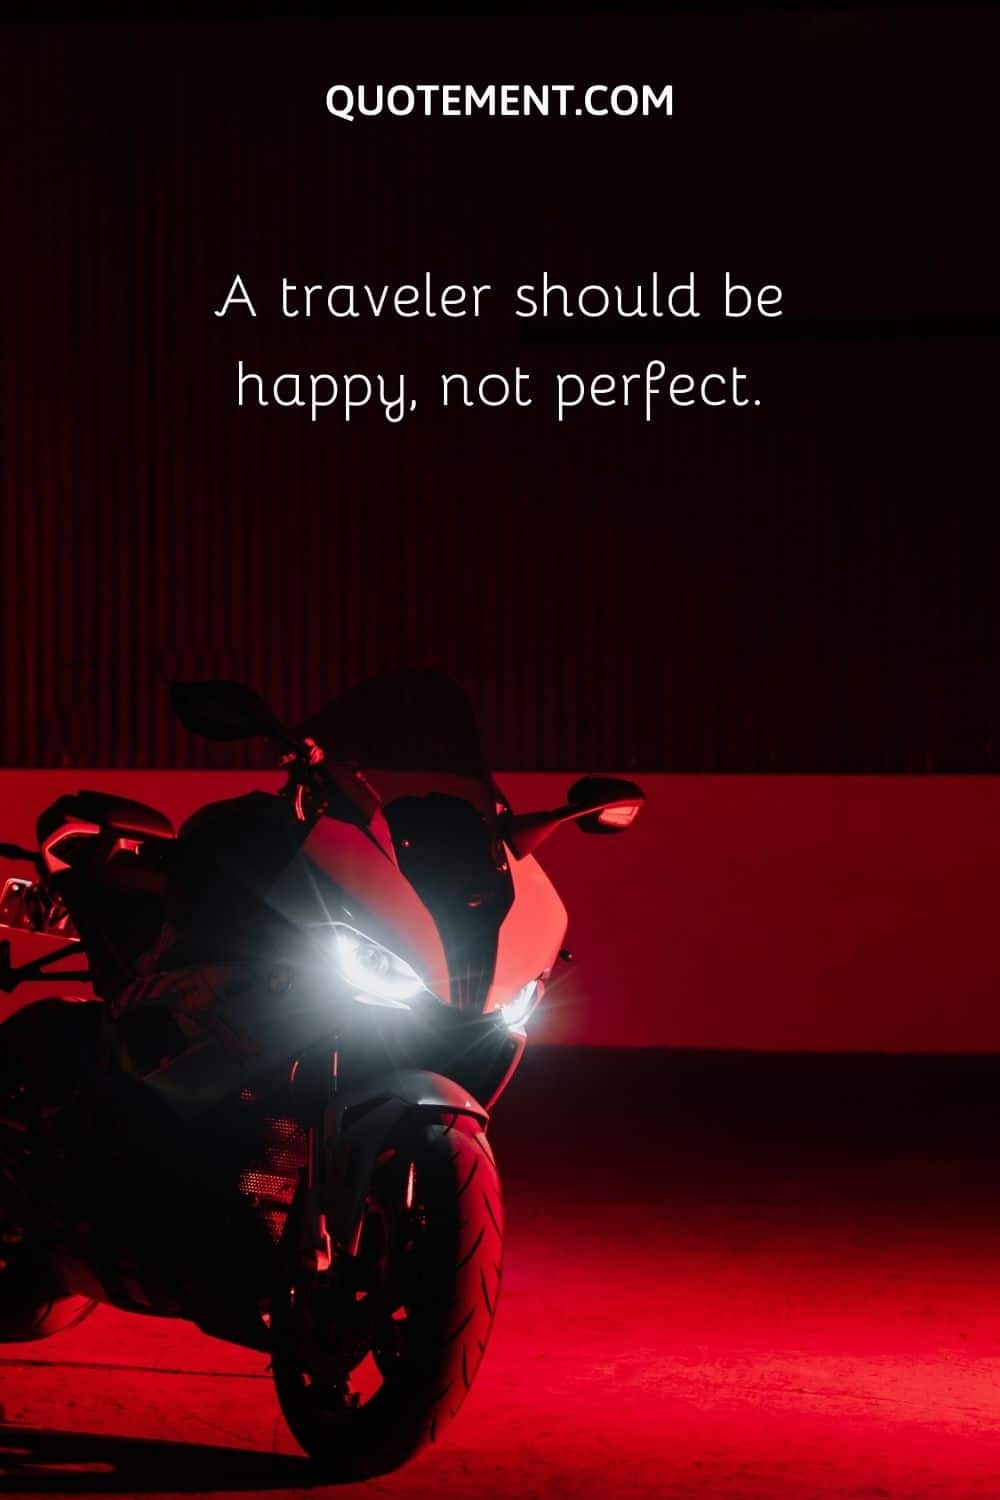 A traveler should be happy, not perfect.